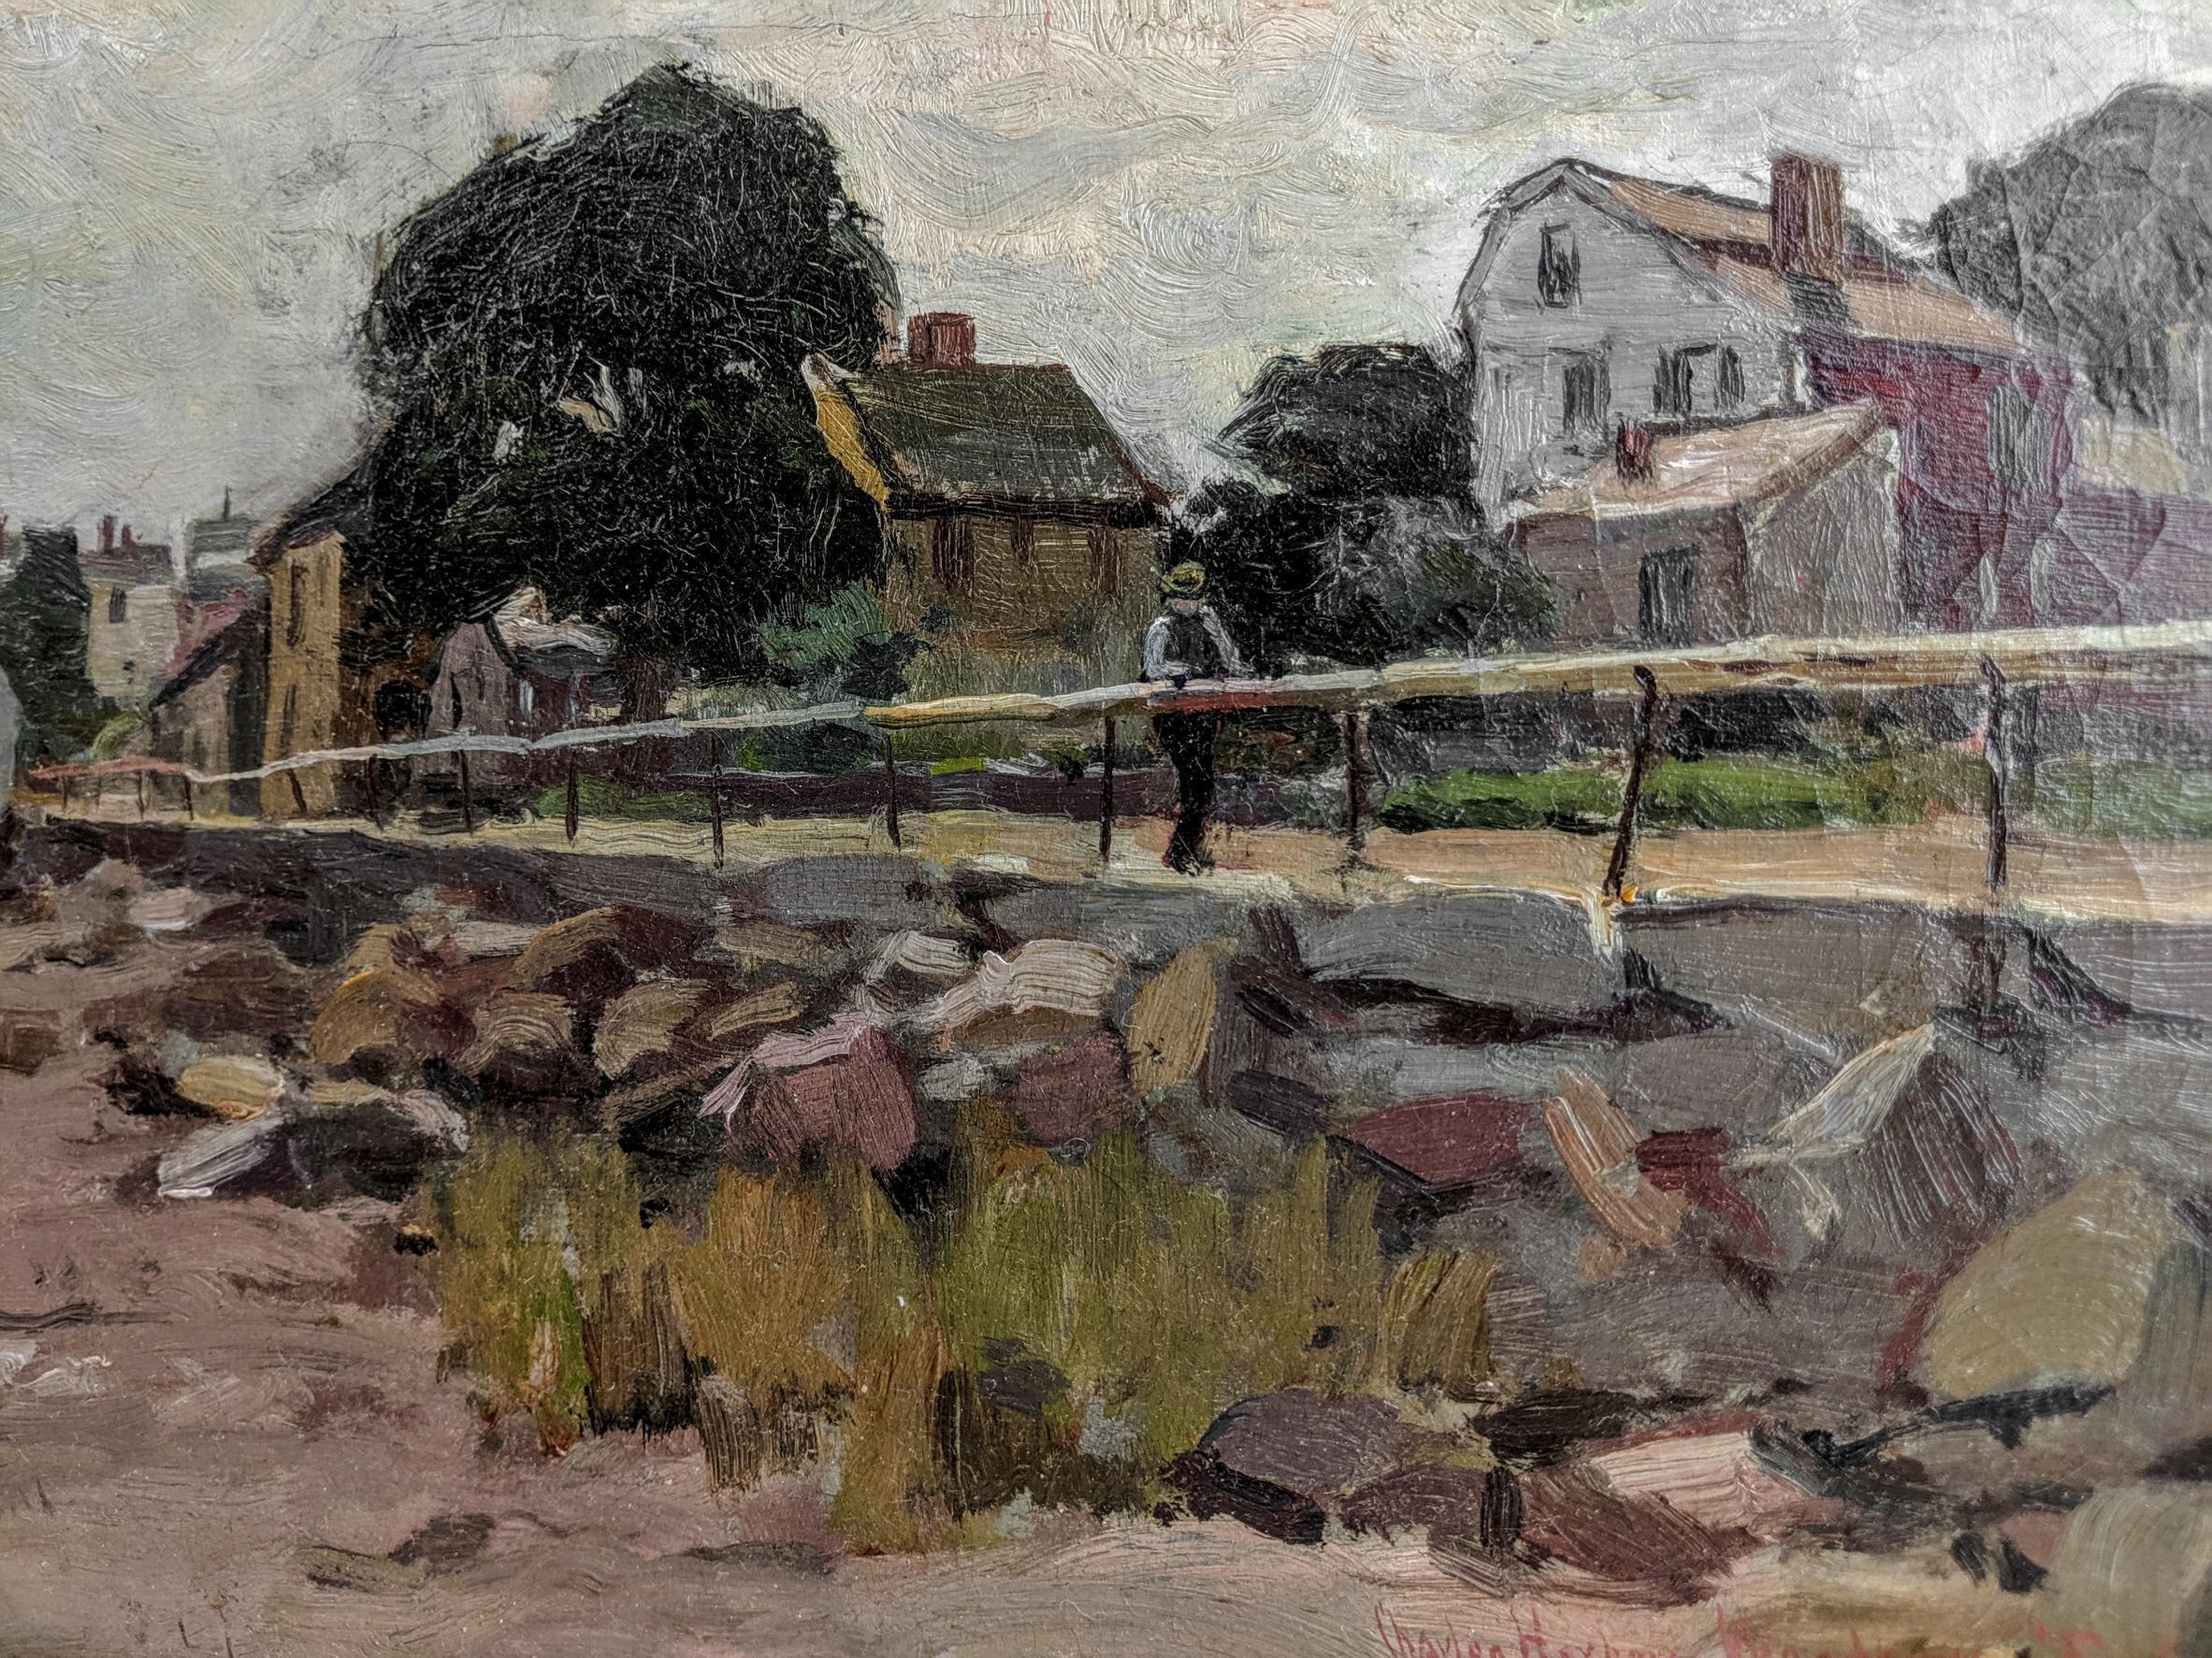 Oil on canvas
Road by the Coast, Ogunquit Maine
Signed lower left “Charles Herbert Wodbury”
Canvas size: 9” x 13 1/8” Framed size: 13 ½” x 17 ½”

Charles H. Woodbury was born in Lynn, Massachusetts, where his earliest work was part of the